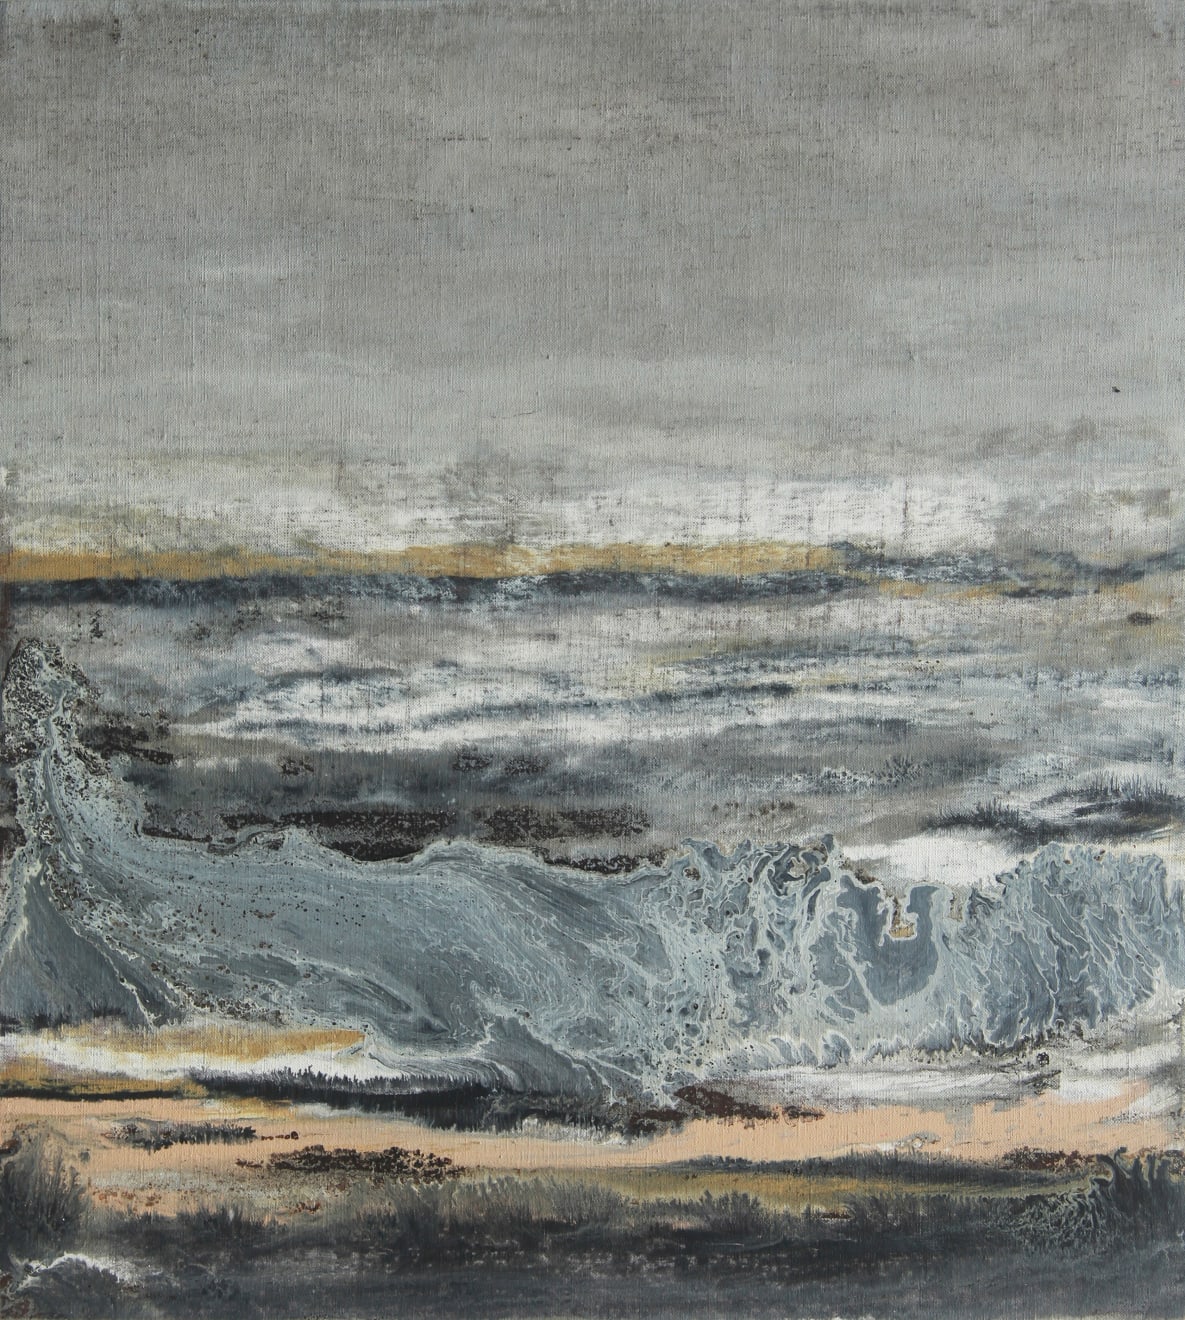 Estuary 04 Oil and Acrylic on Linen Mounted Board 53 x 63.5cm AUD $1400 SOLD